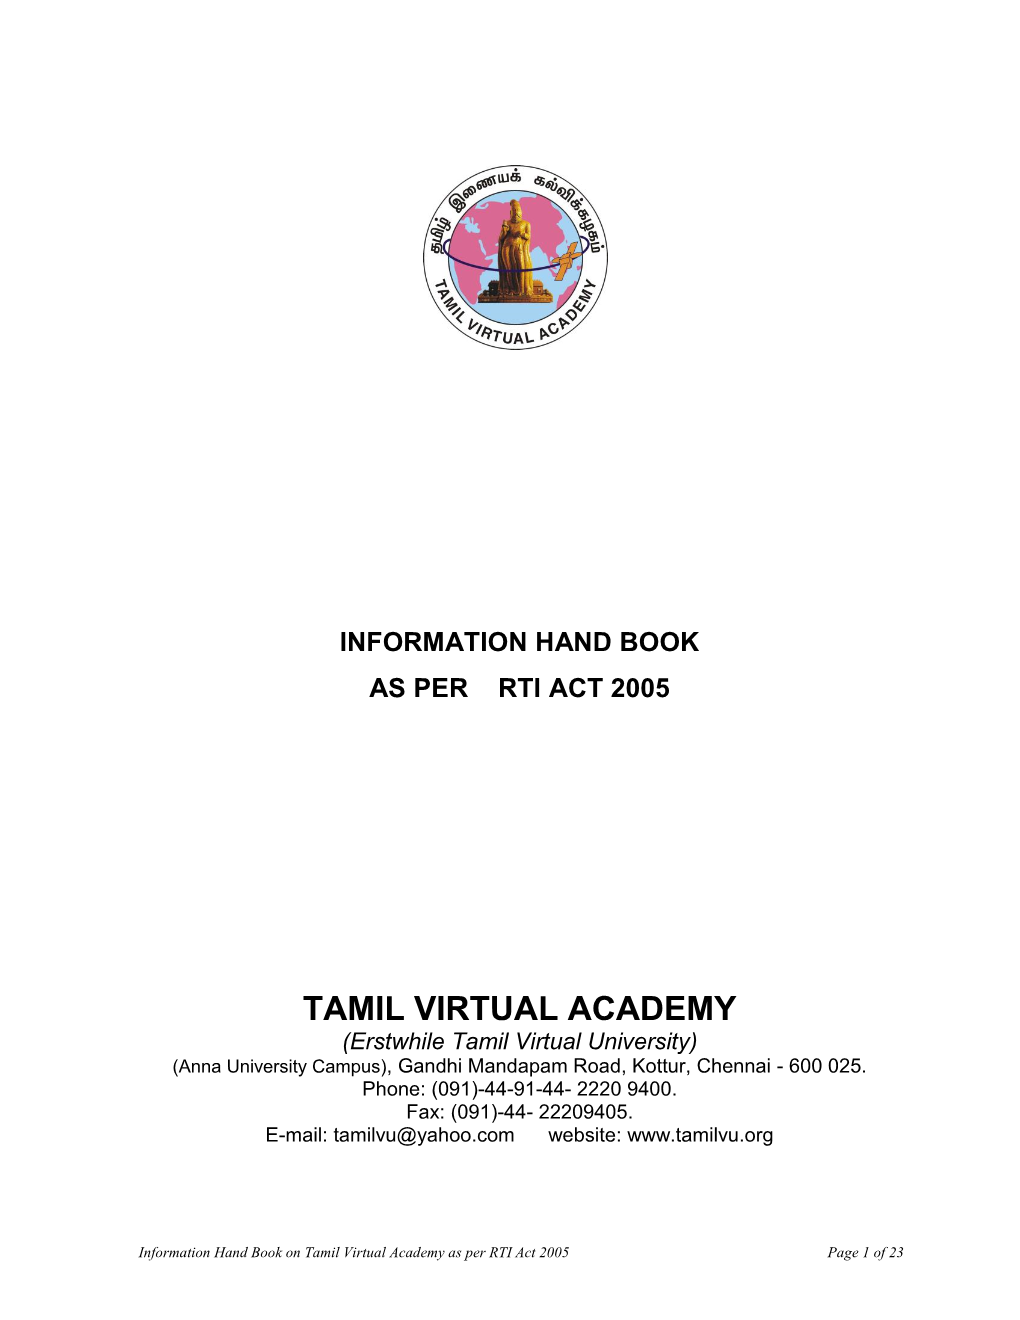 Information Hand Book As Per Rti Act 2005